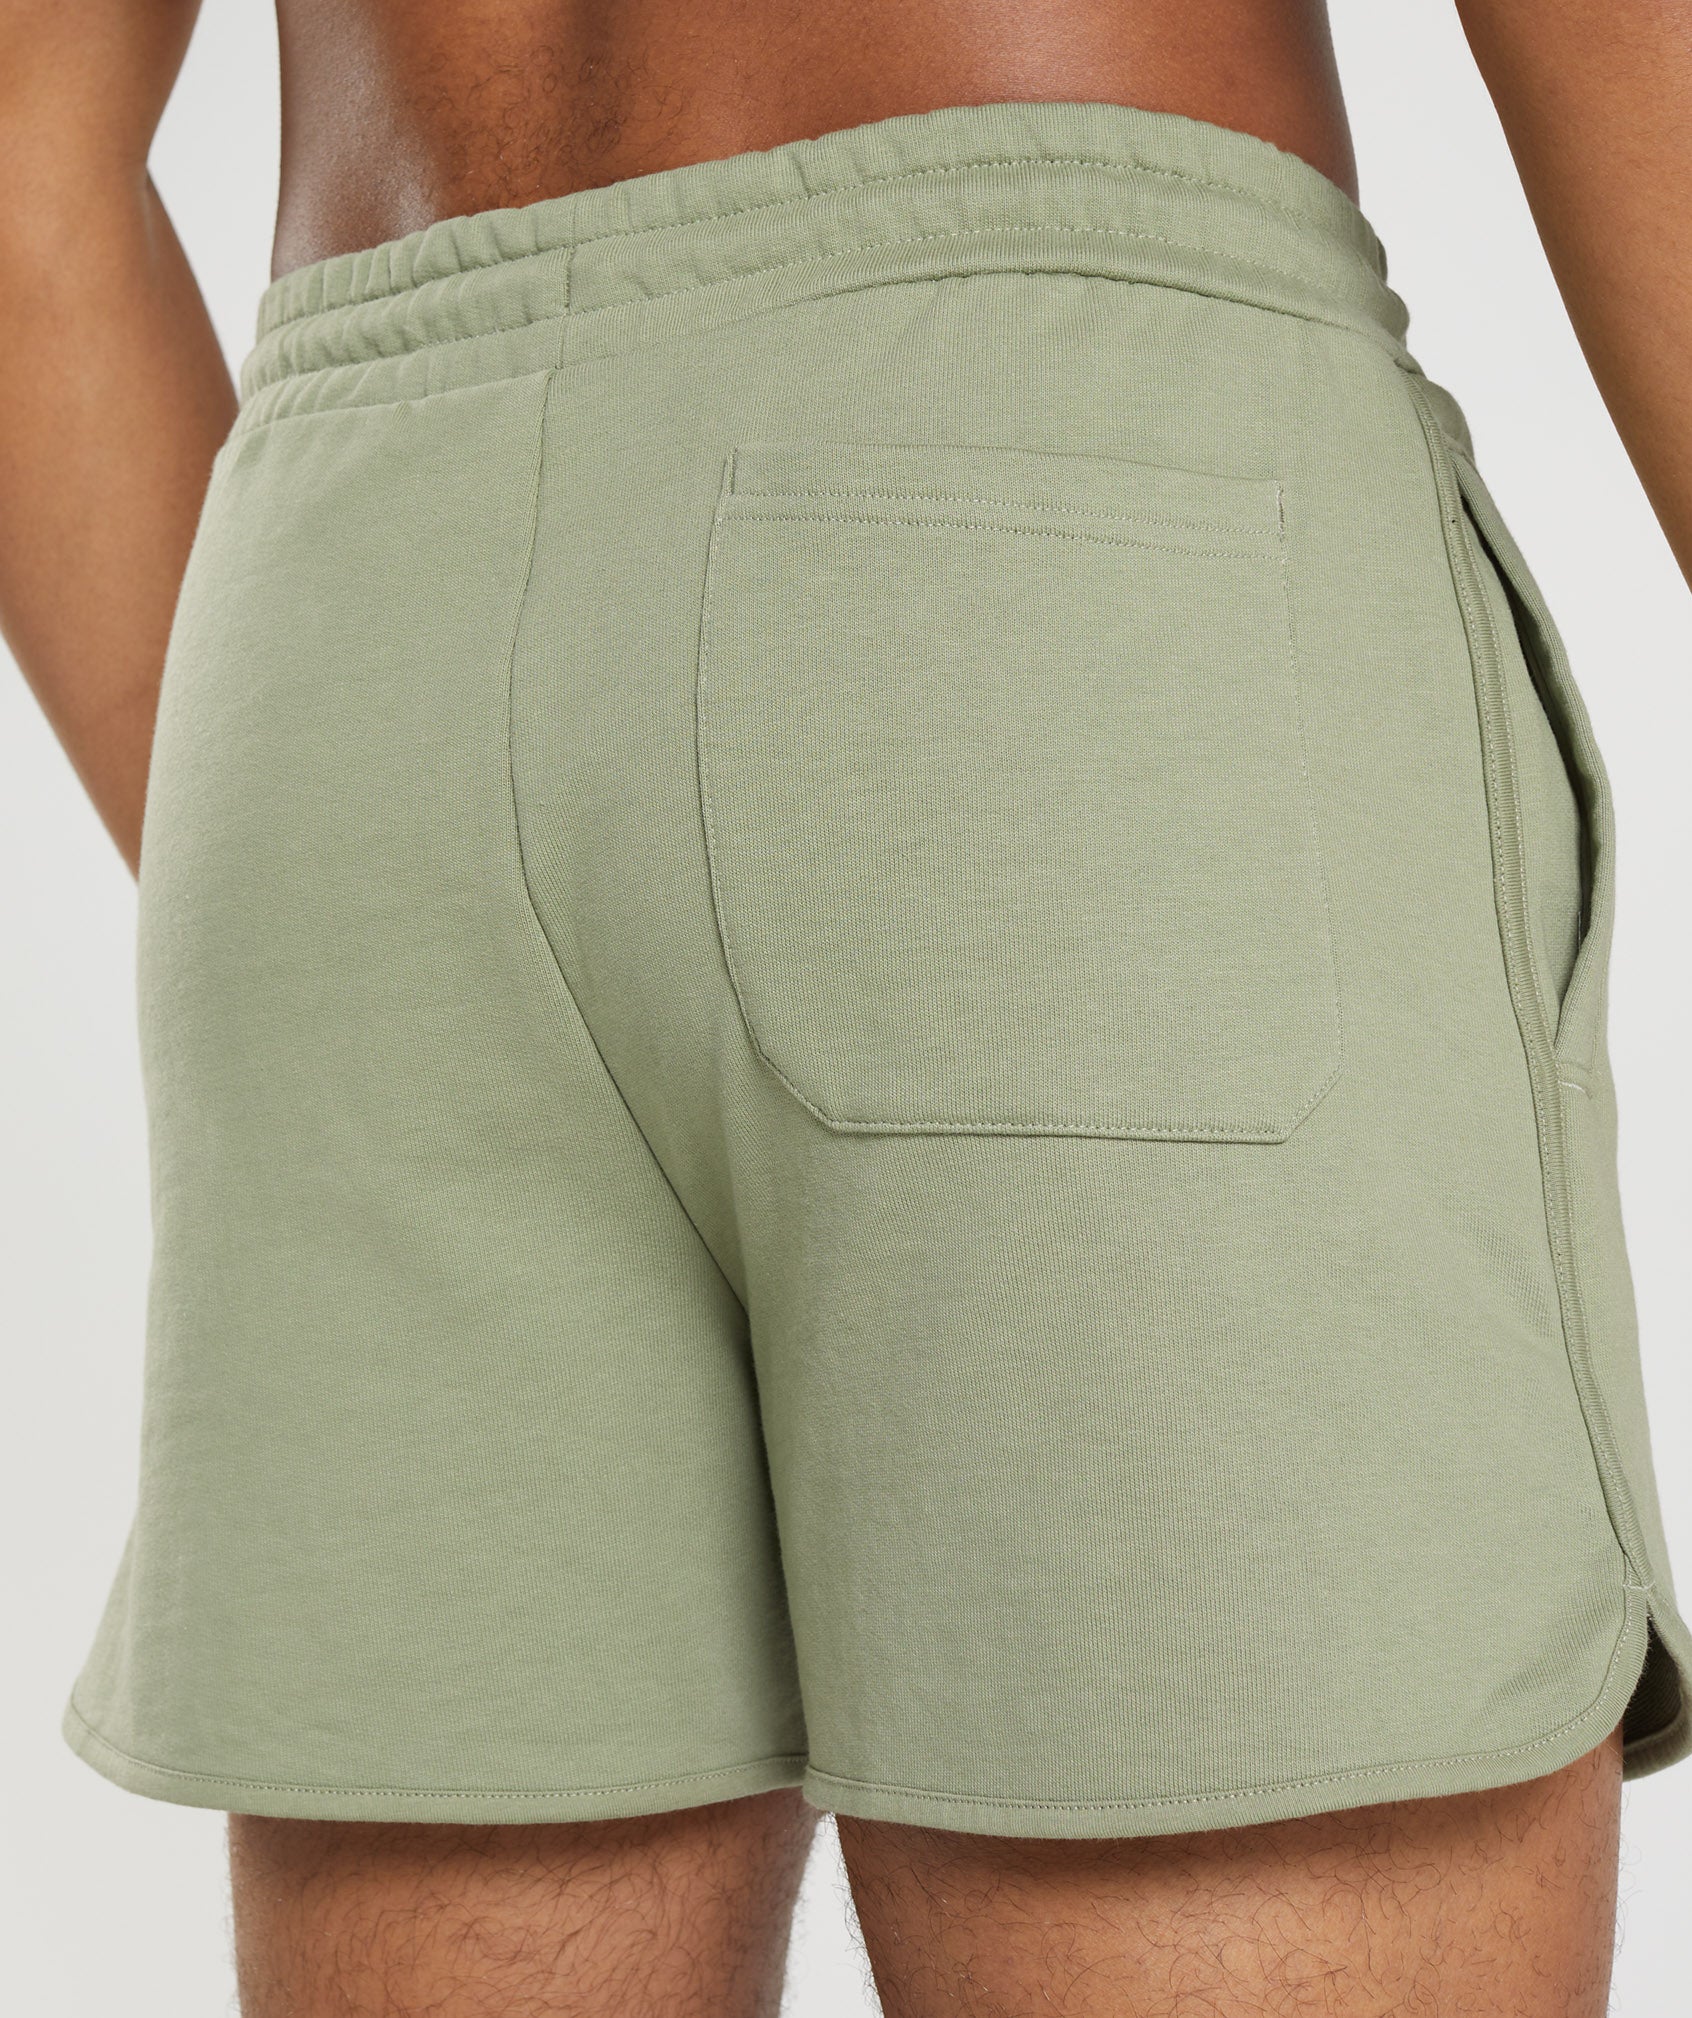 Rest Day Sweats 4'' Lounge Shorts in Sage Green